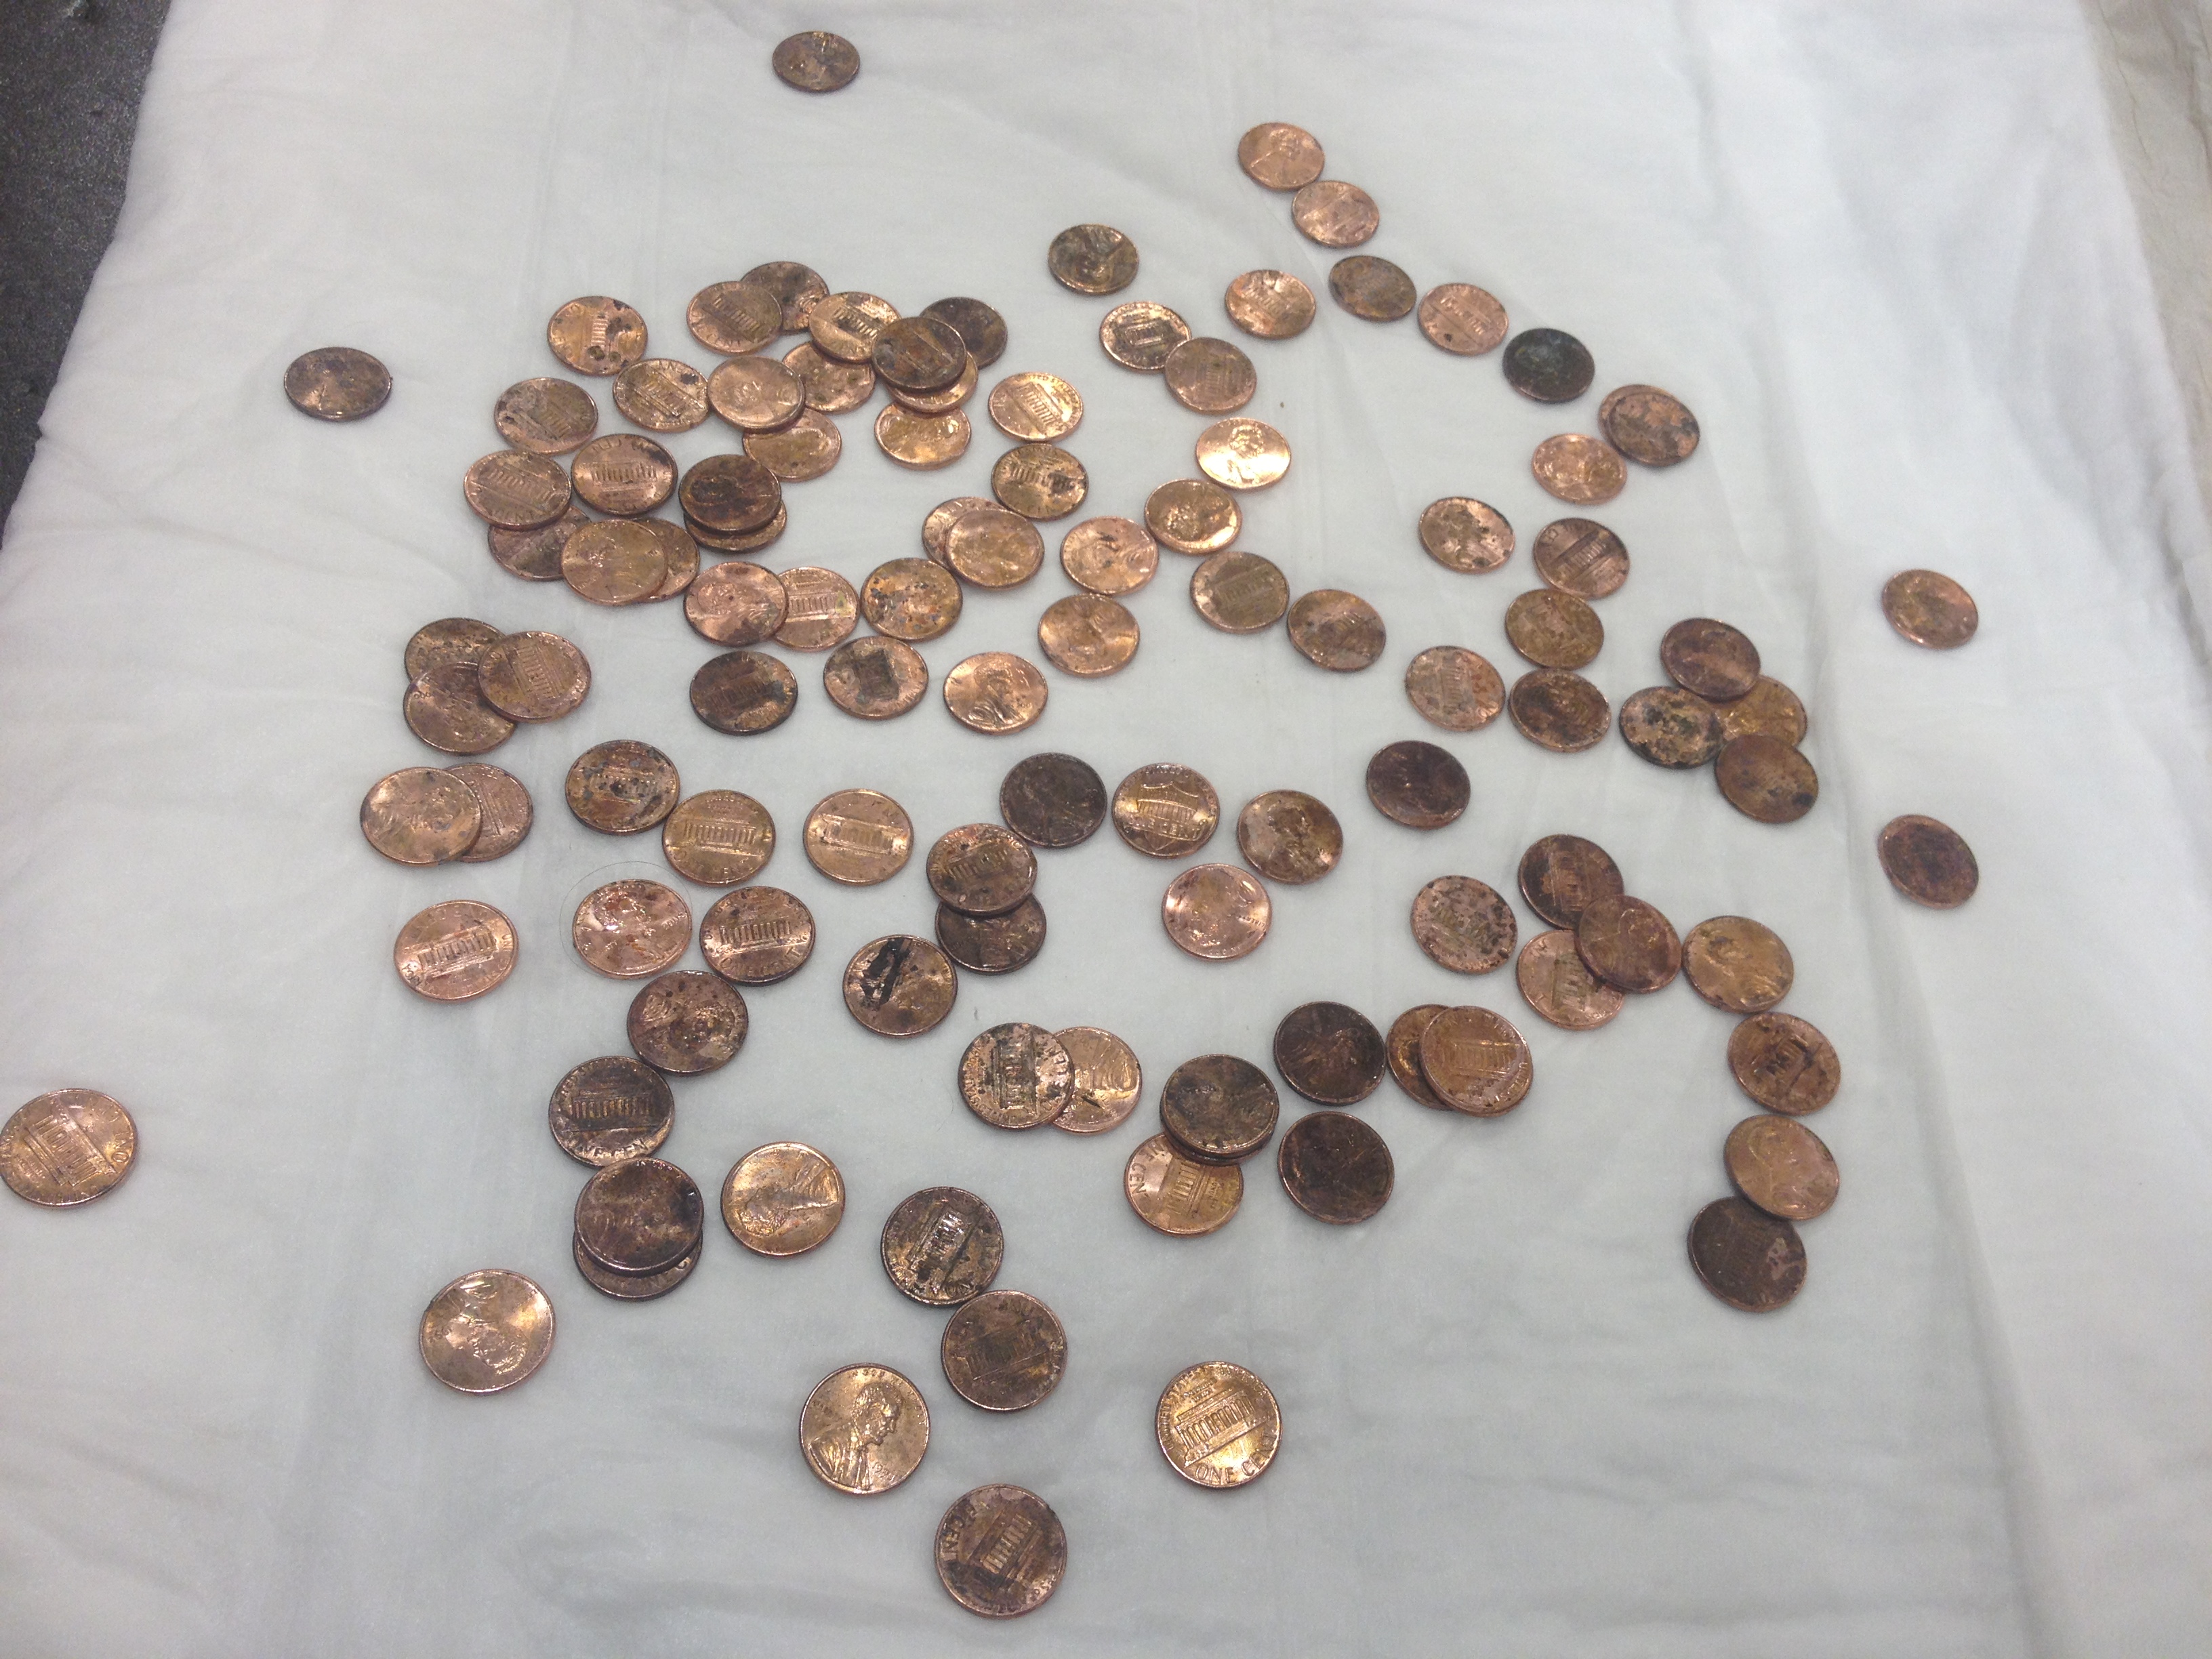 111 pennies removed from Jack's stomach. (BluePearl)